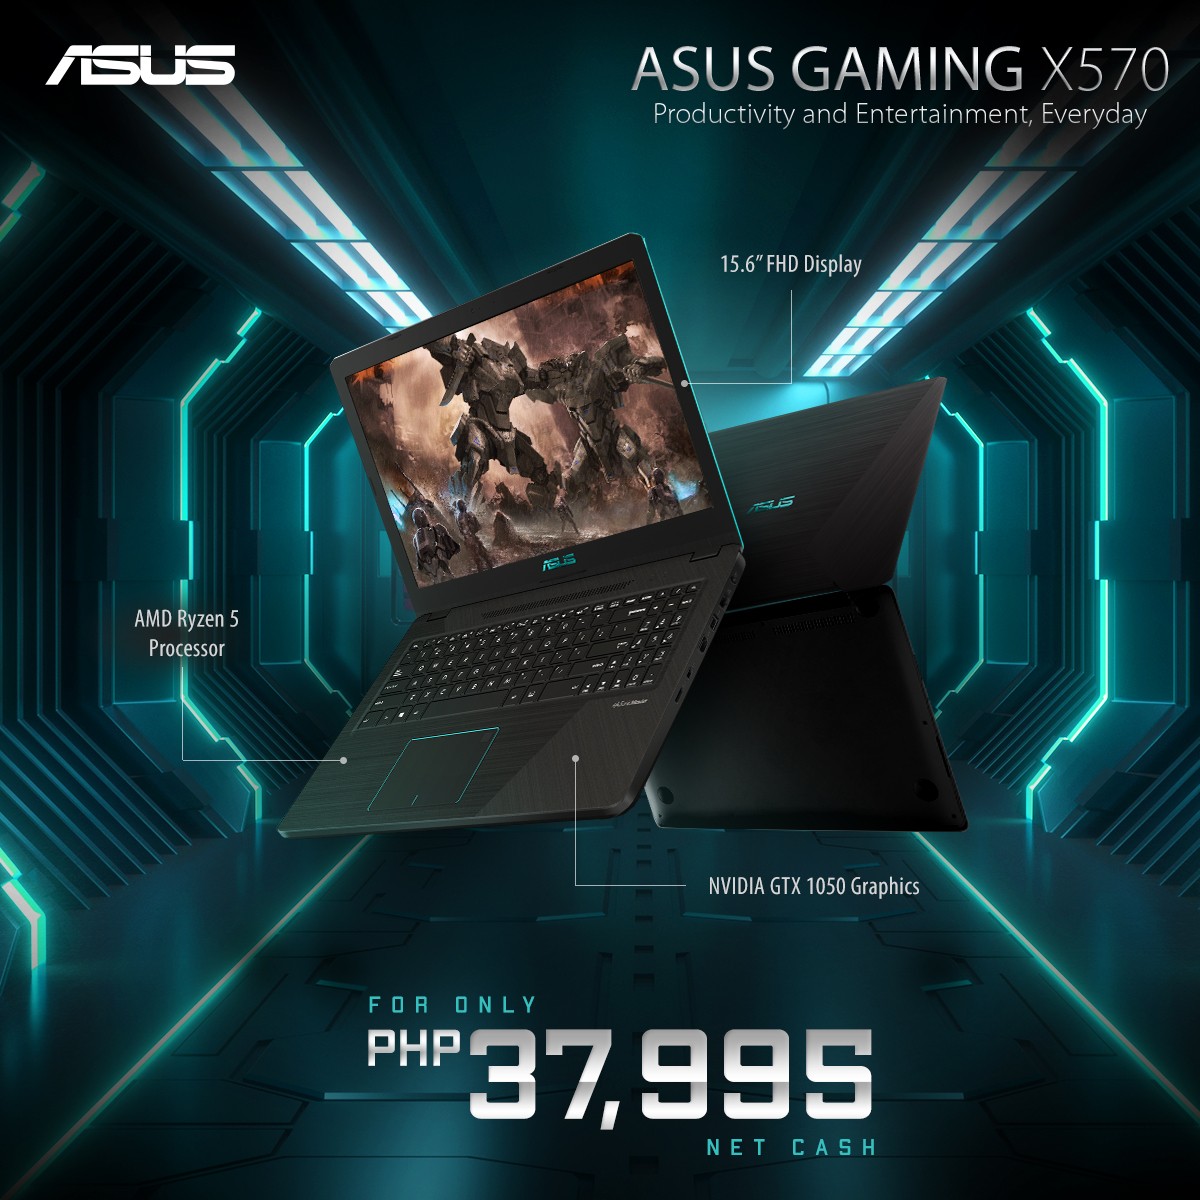 ASUS Gaming's X570 is the Most Affordable Notebook to have a GTX1050 GPU - UNBOX PH